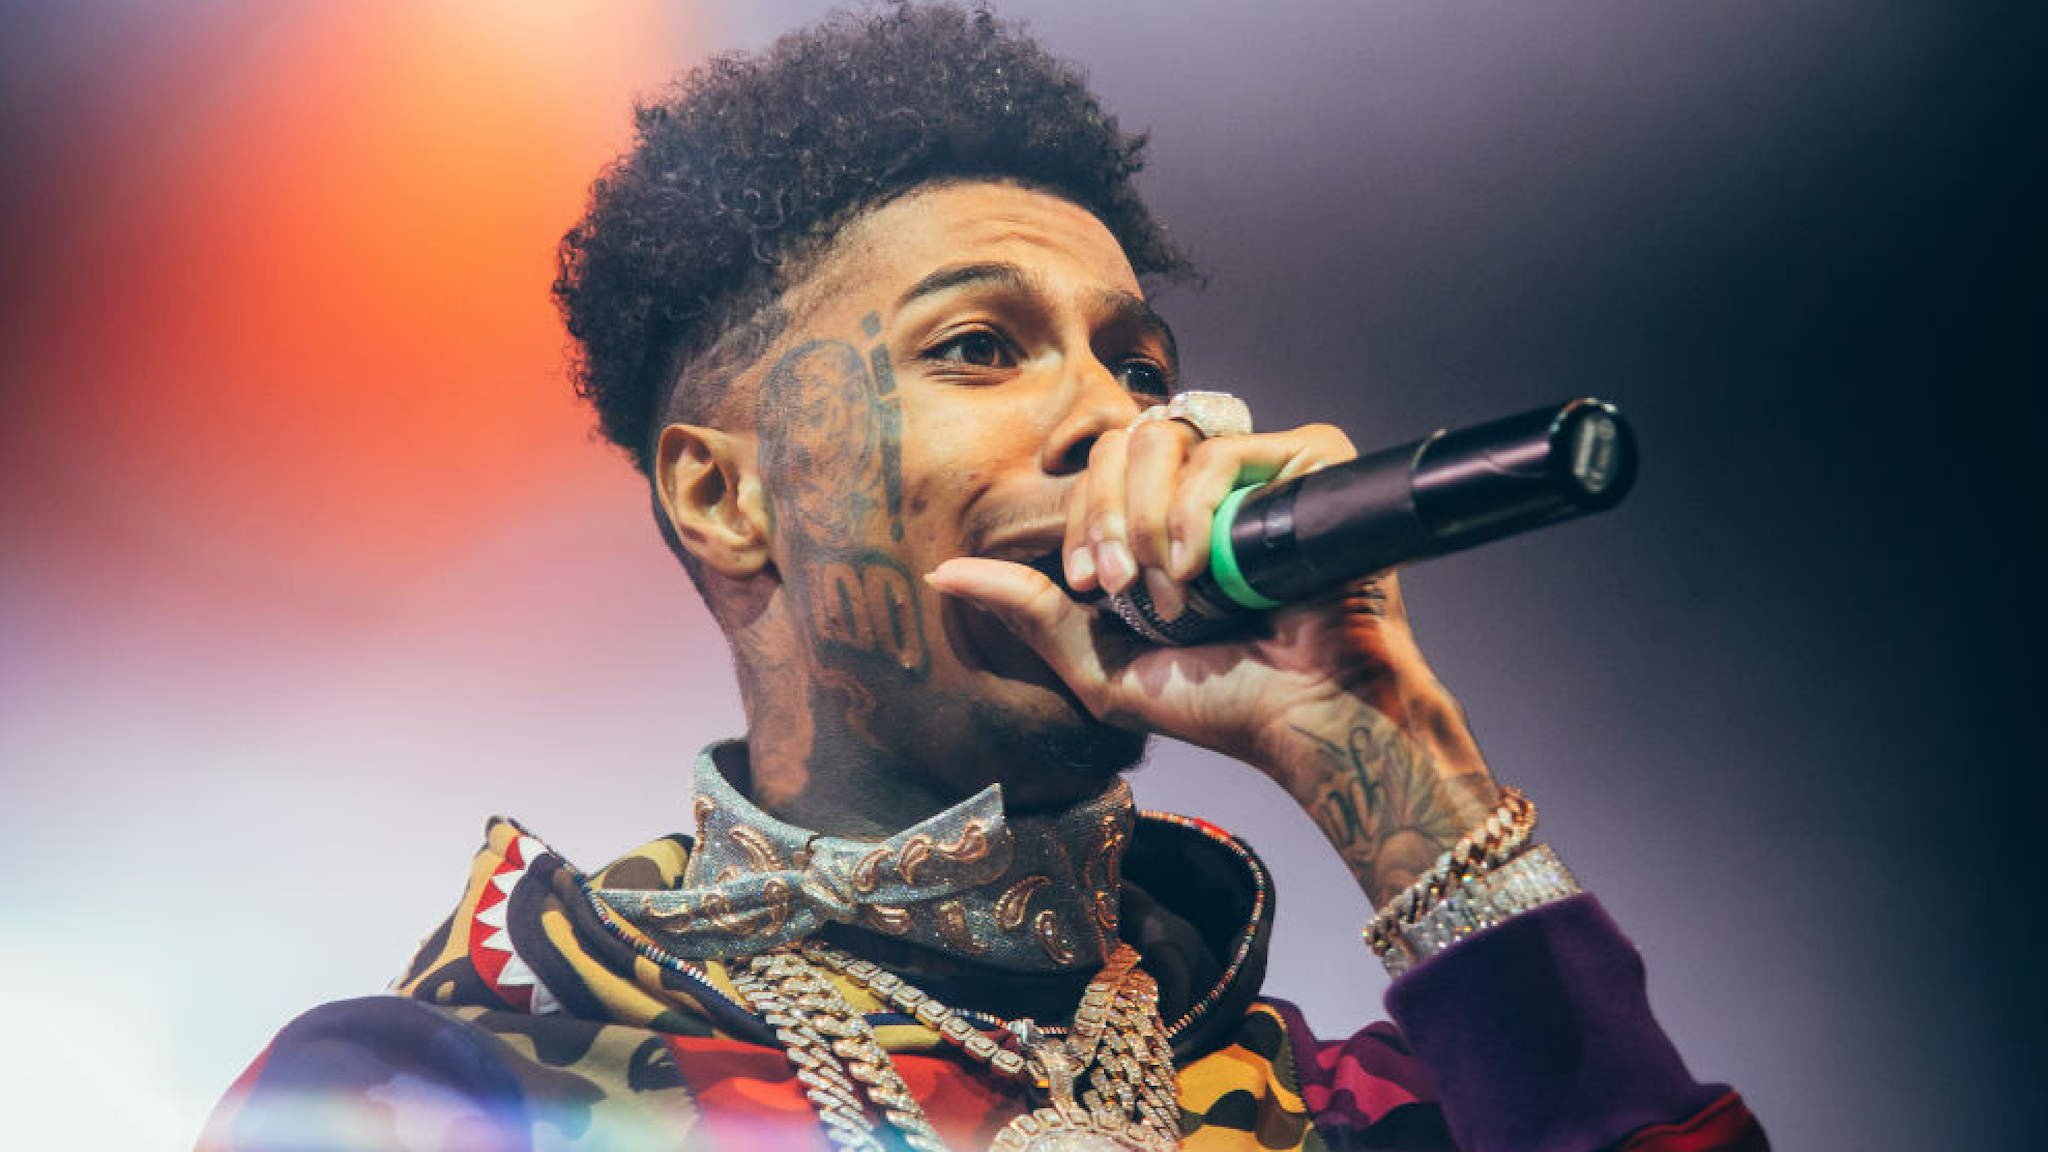 Blueface performs at O2 Academy Brixton on November 20, 2019 in London, England.